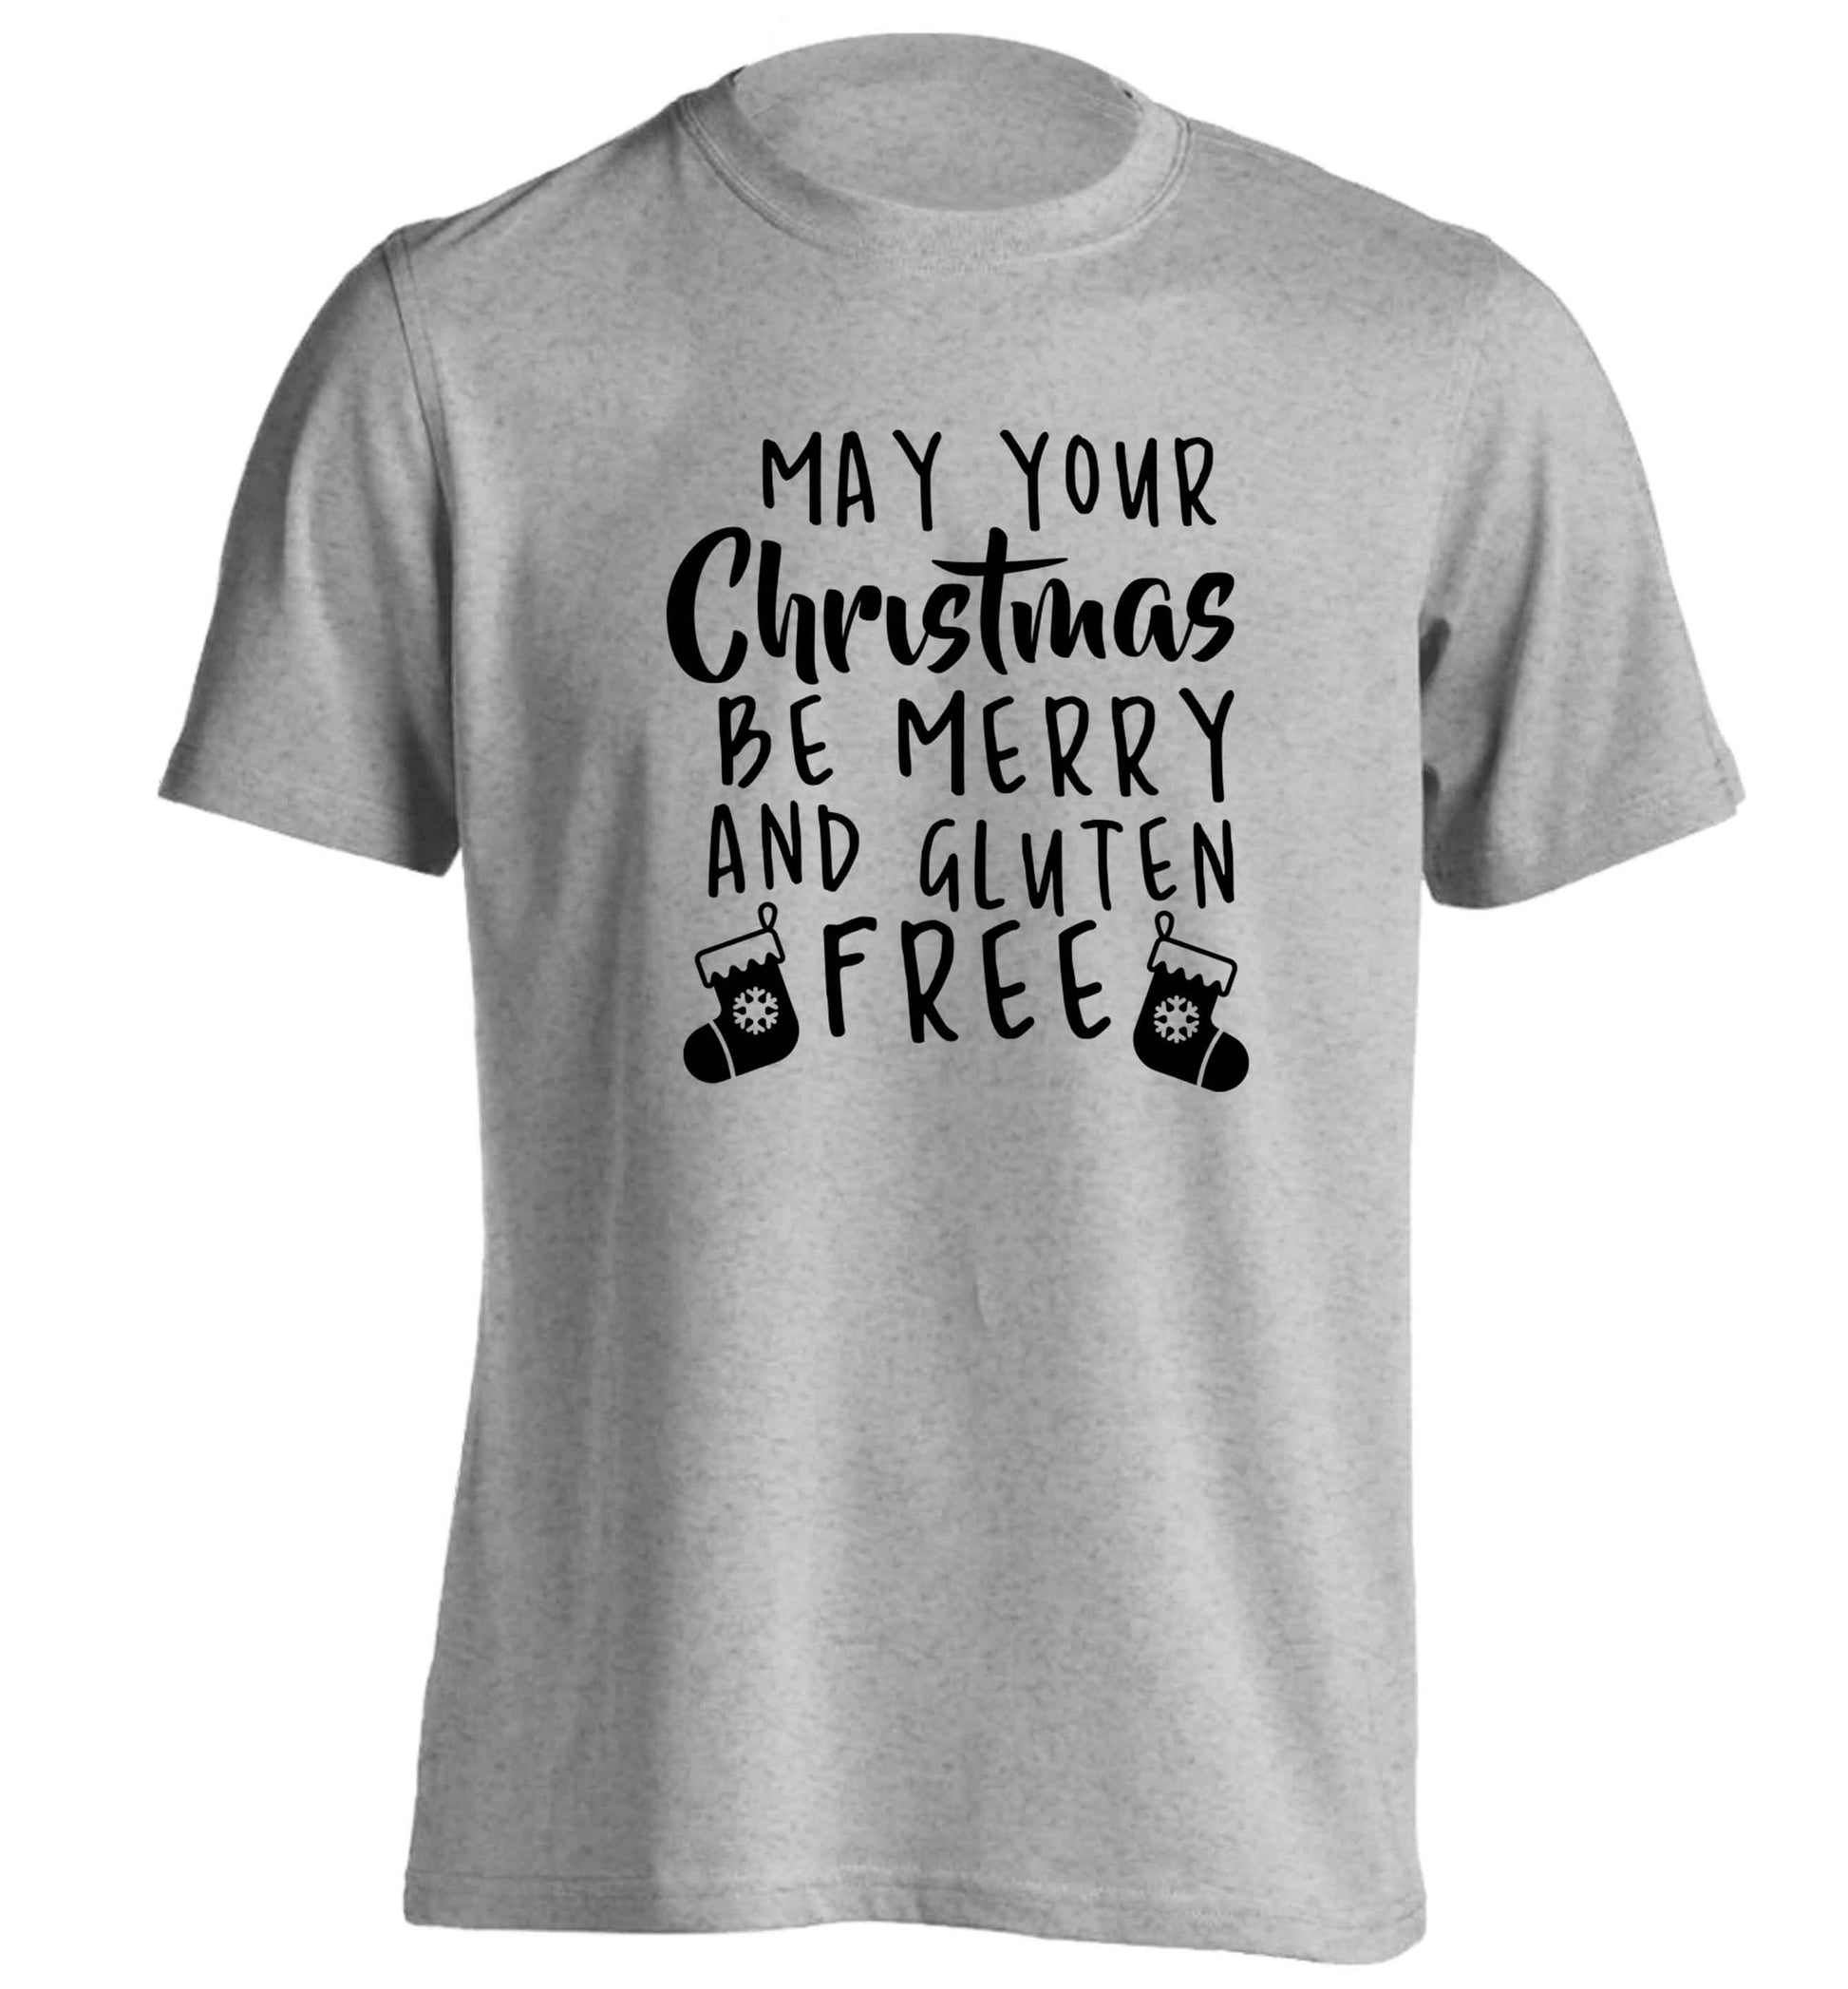 May your Christmas be merry and gluten free adults unisex grey Tshirt 2XL